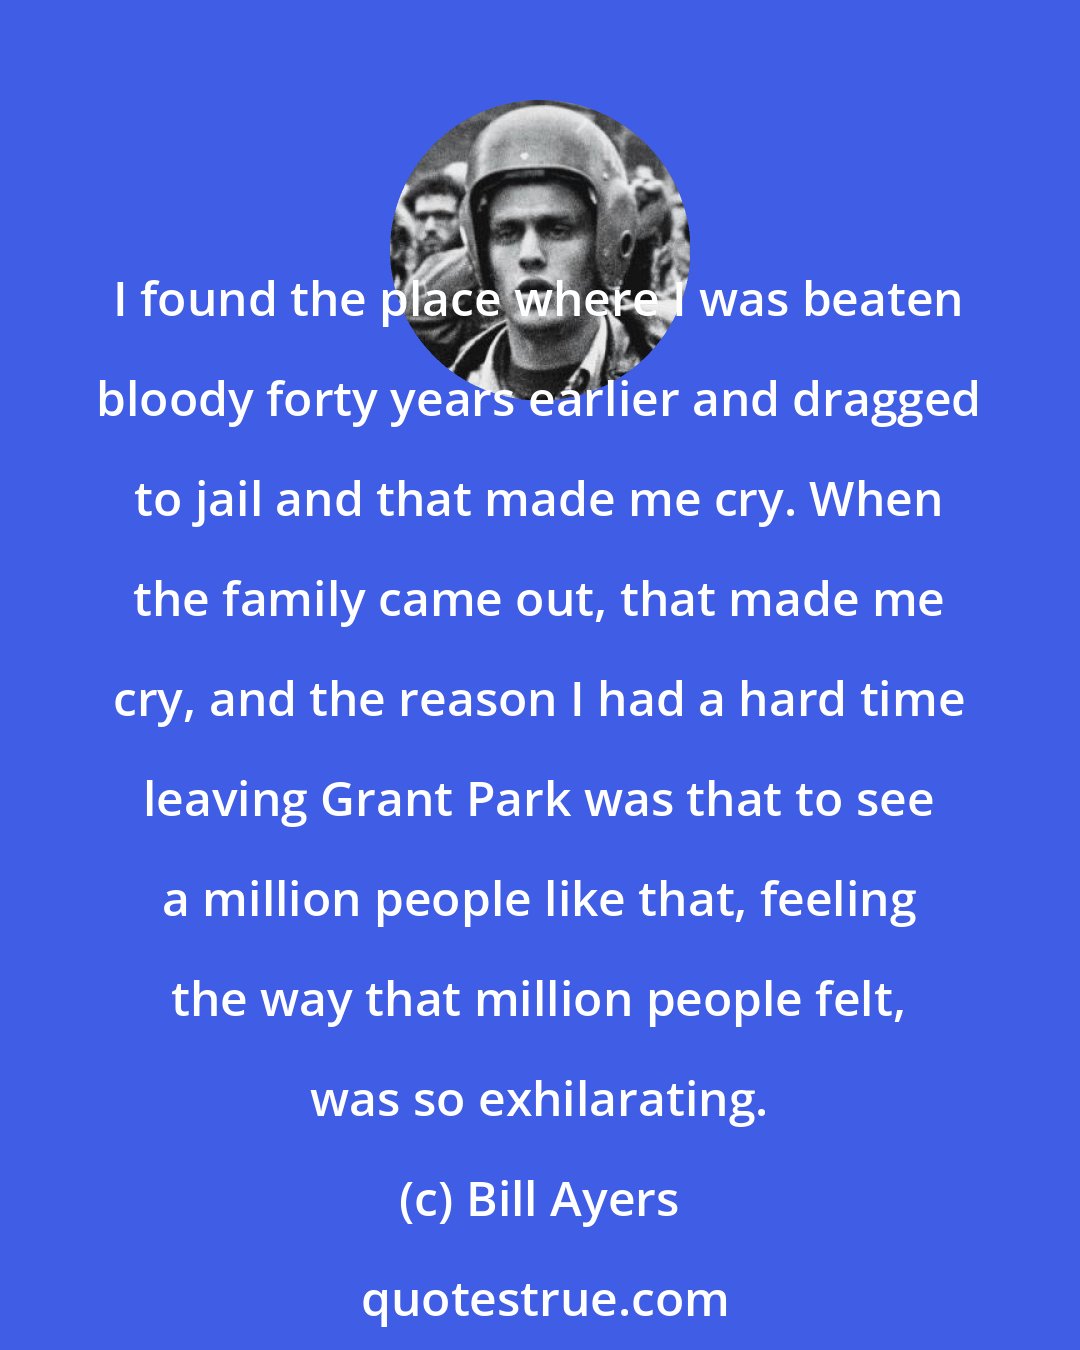 Bill Ayers: I found the place where I was beaten bloody forty years earlier and dragged to jail and that made me cry. When the family came out, that made me cry, and the reason I had a hard time leaving Grant Park was that to see a million people like that, feeling the way that million people felt, was so exhilarating.